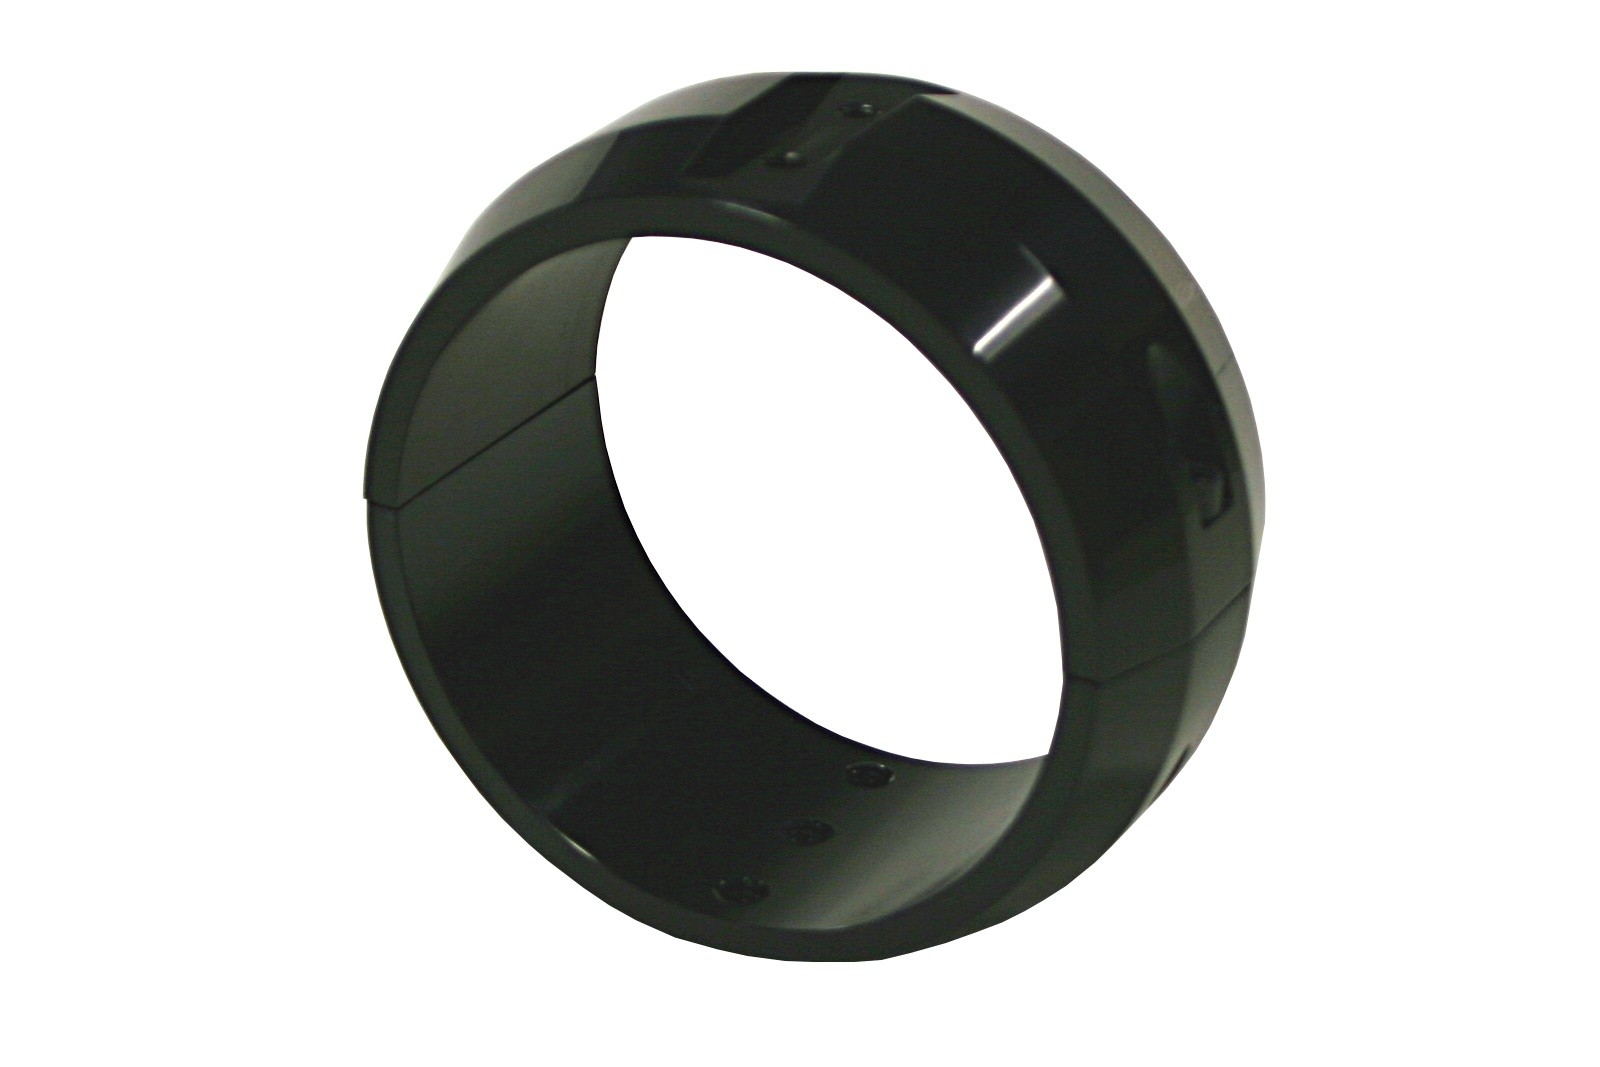 LUNT Clamshell Mounting Ring for LS60 telescopes